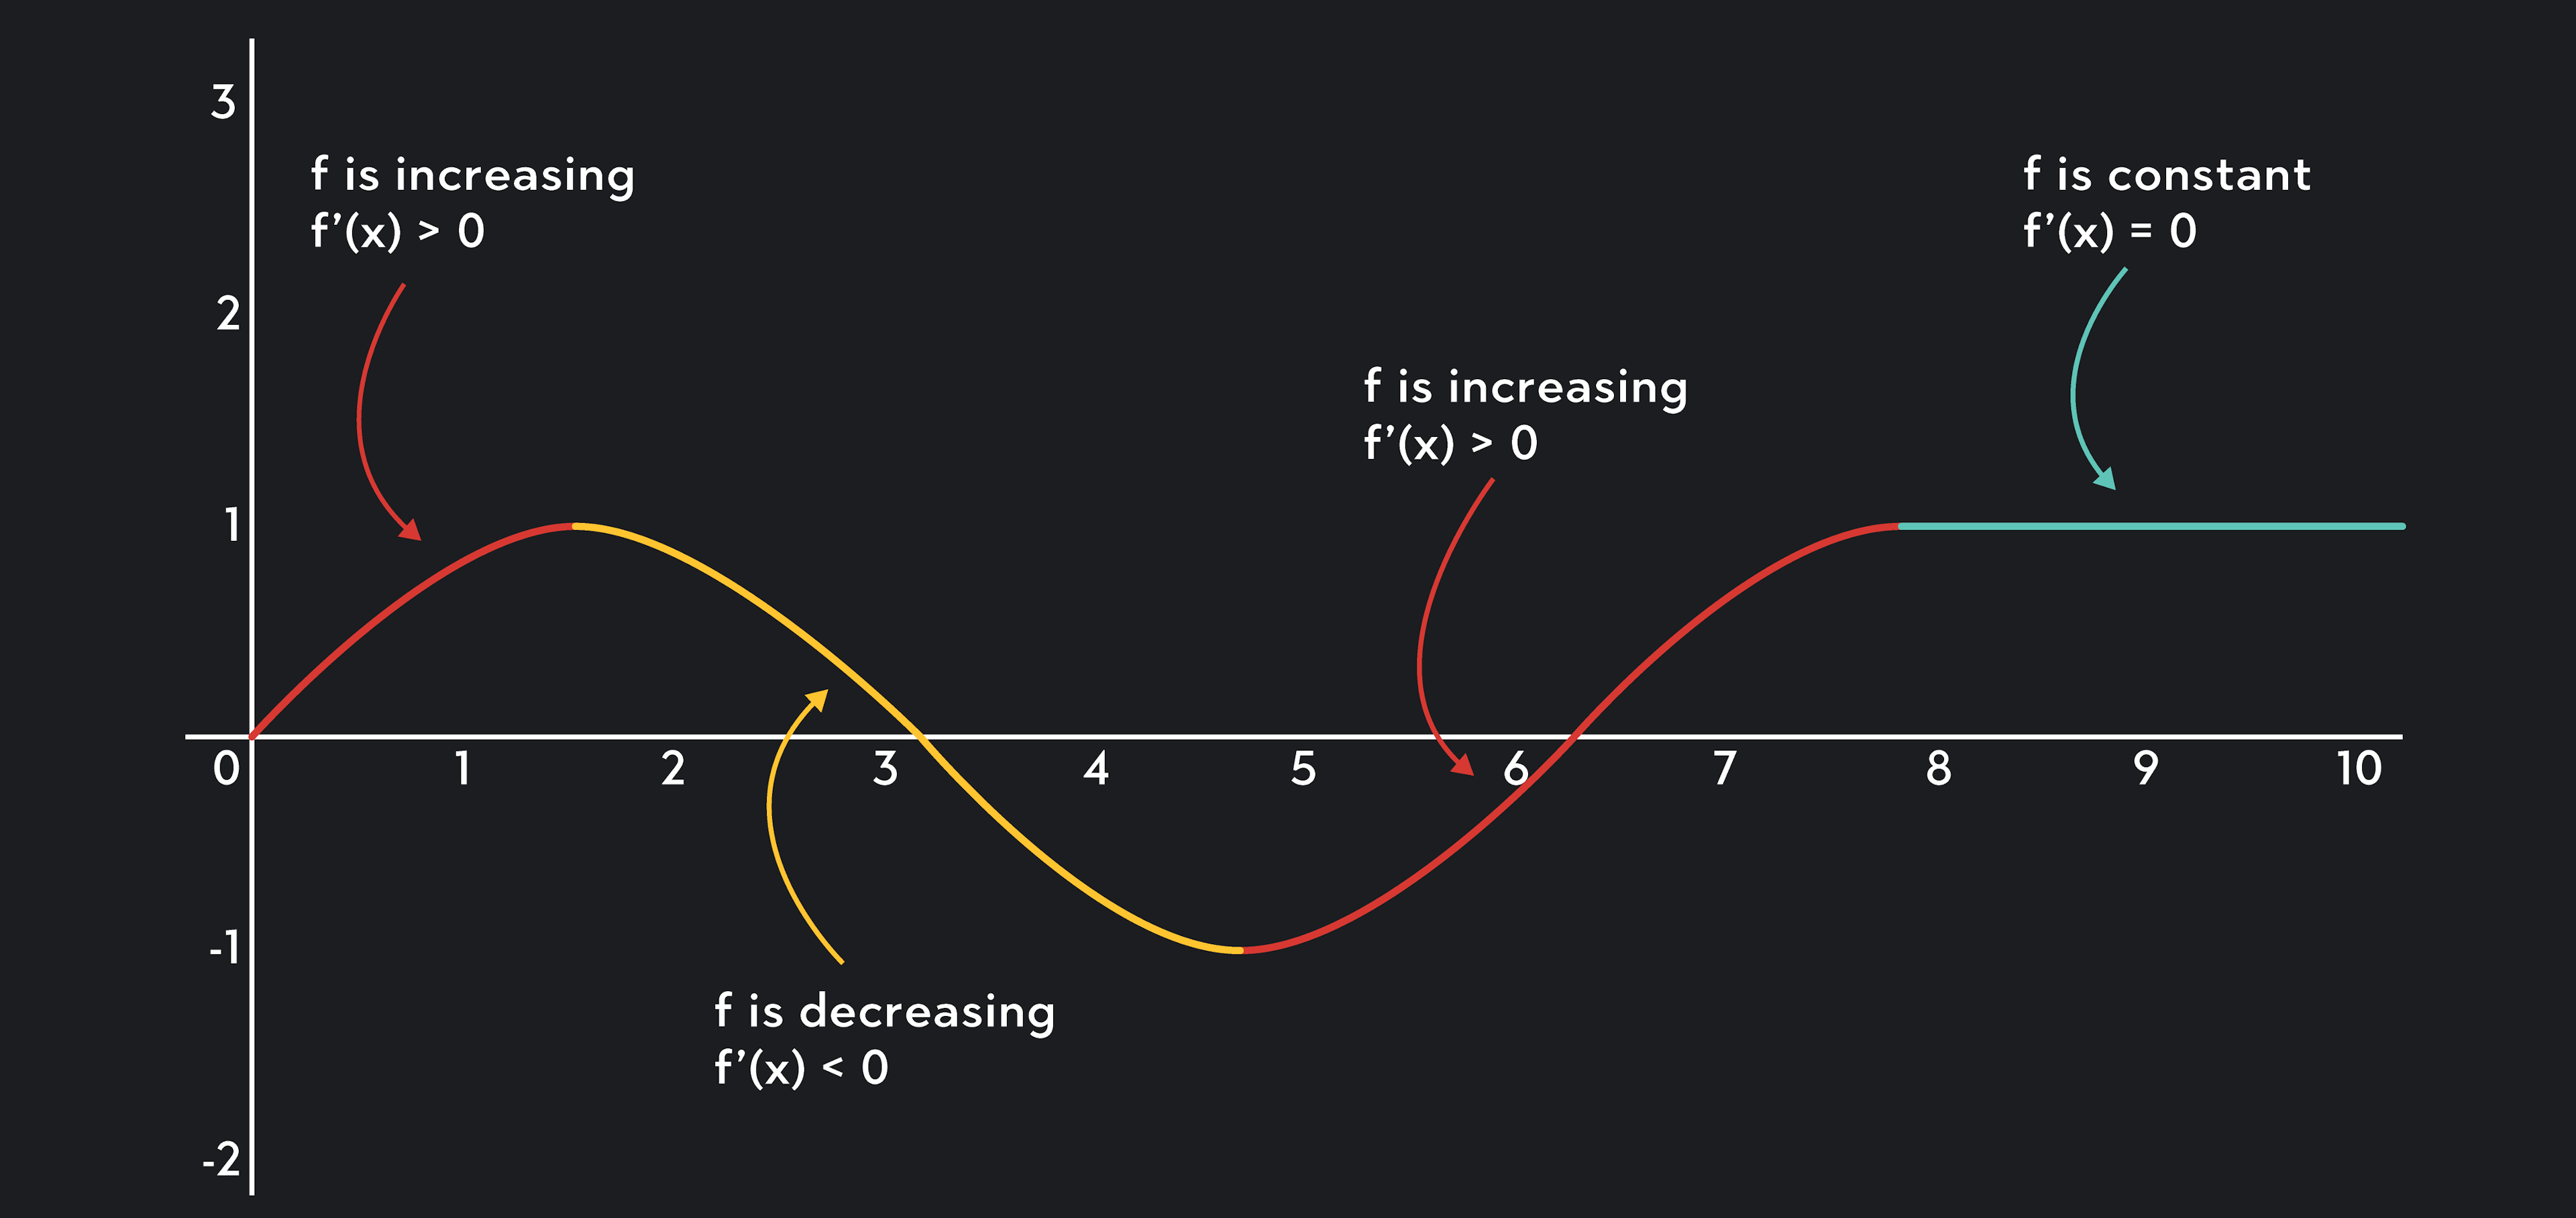 concave graph testing if f(x) is increasing, decreasing, or constant